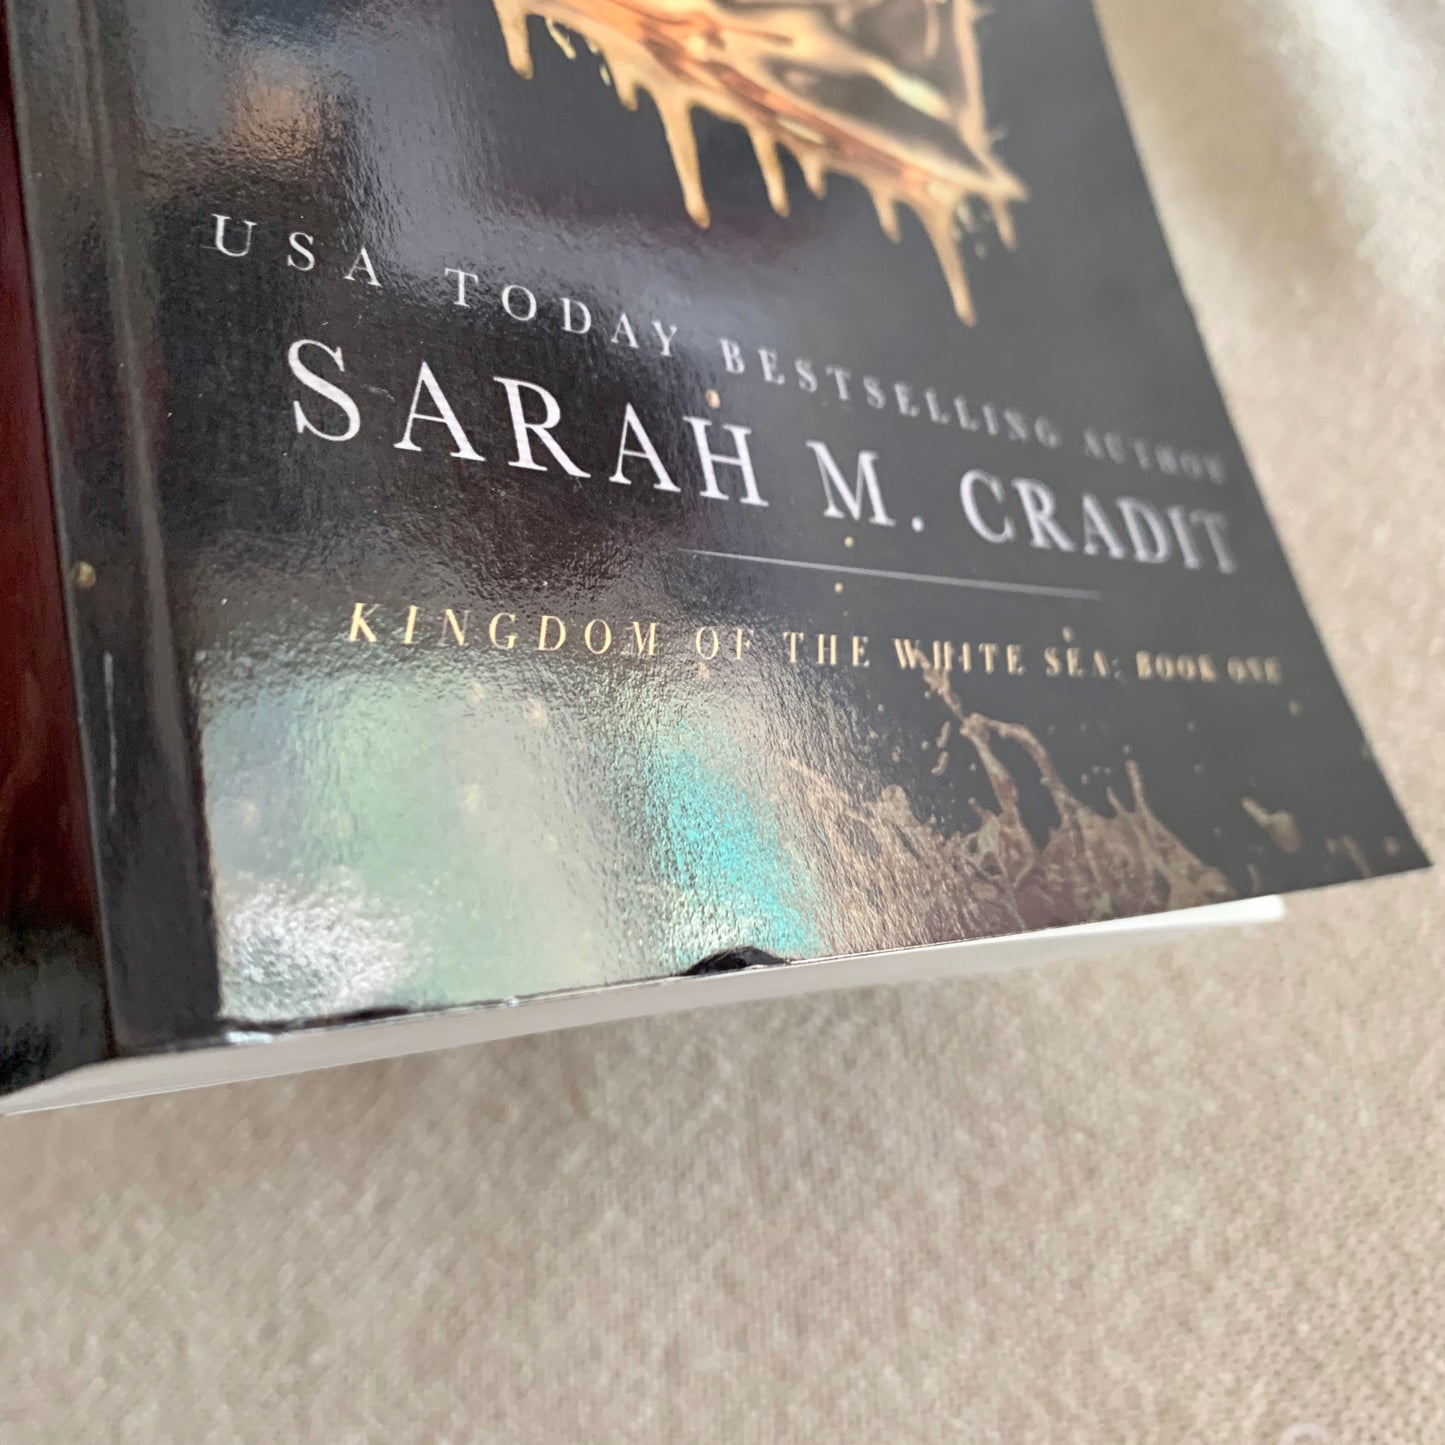 The Kingless Crown by Sarah M. Cradit